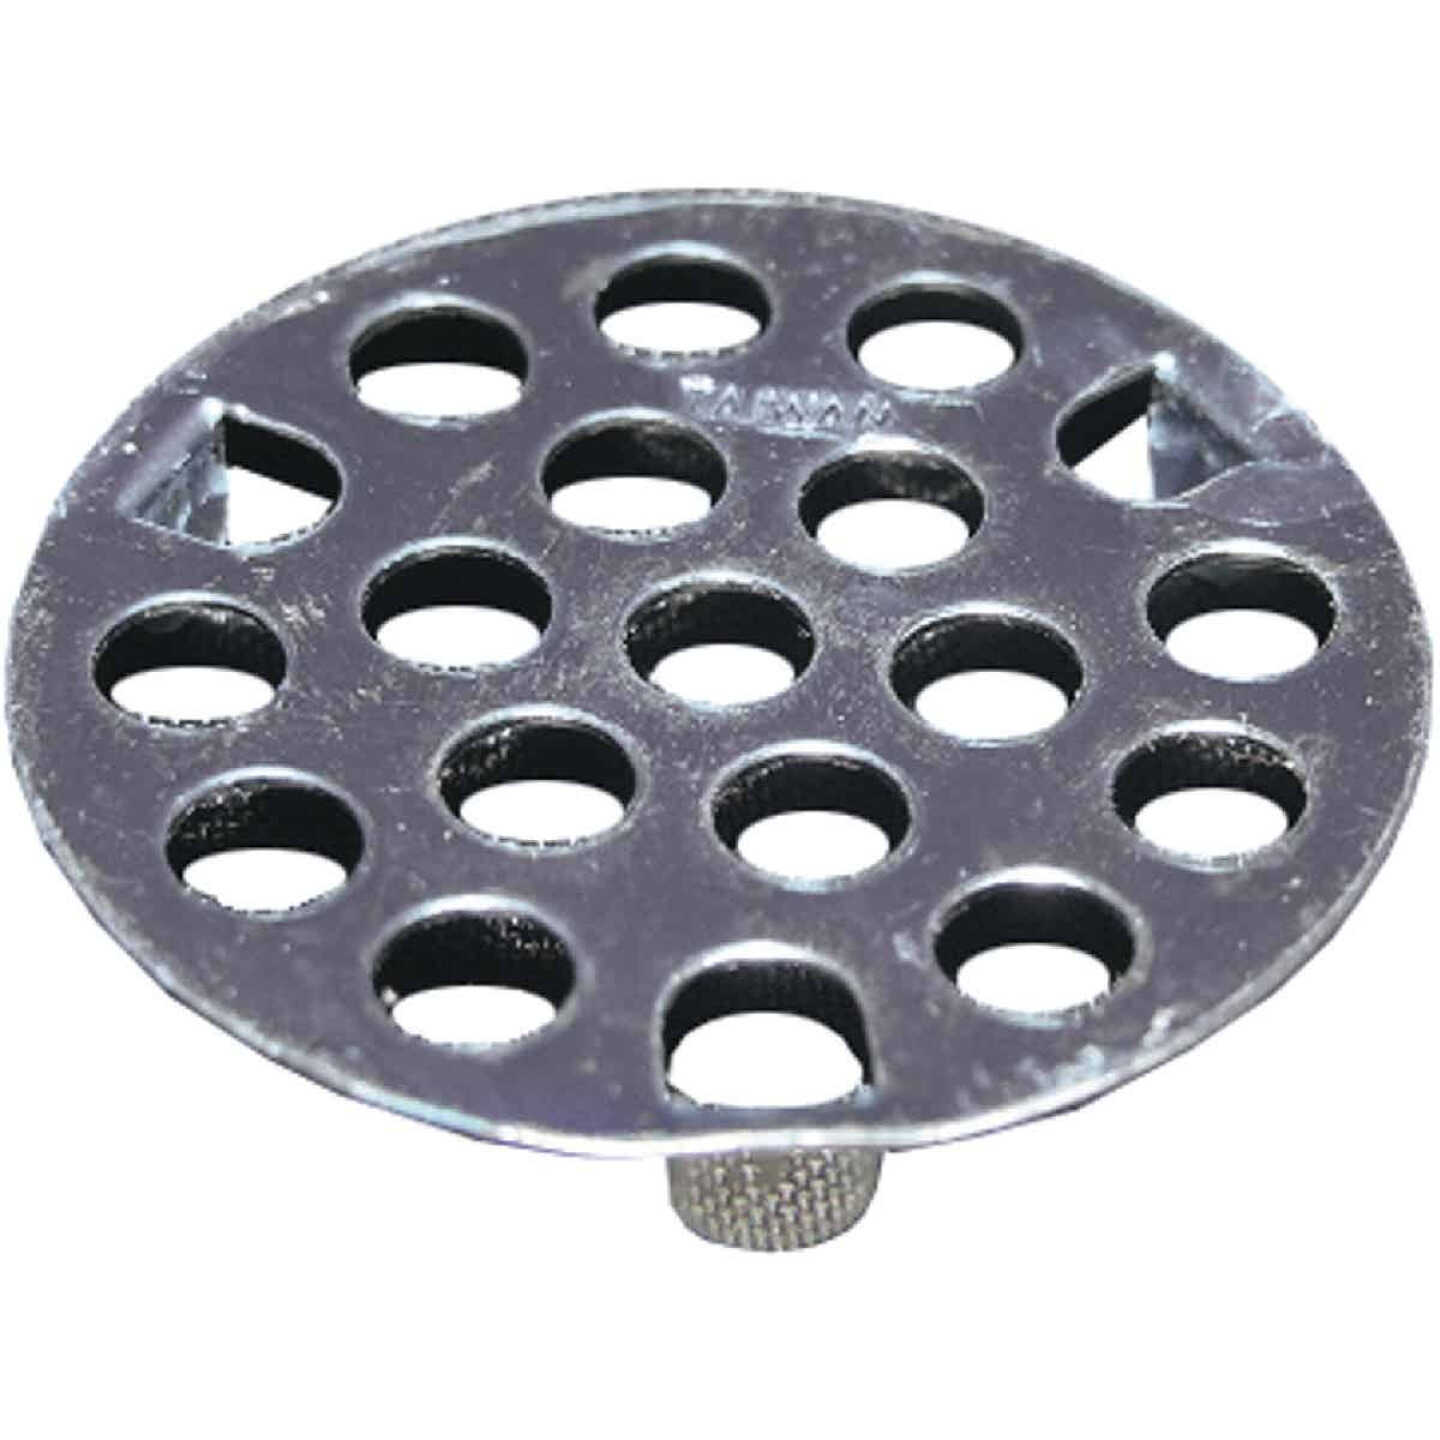 Buy Do it Dome Cover Tub Drain Strainer 2 In.